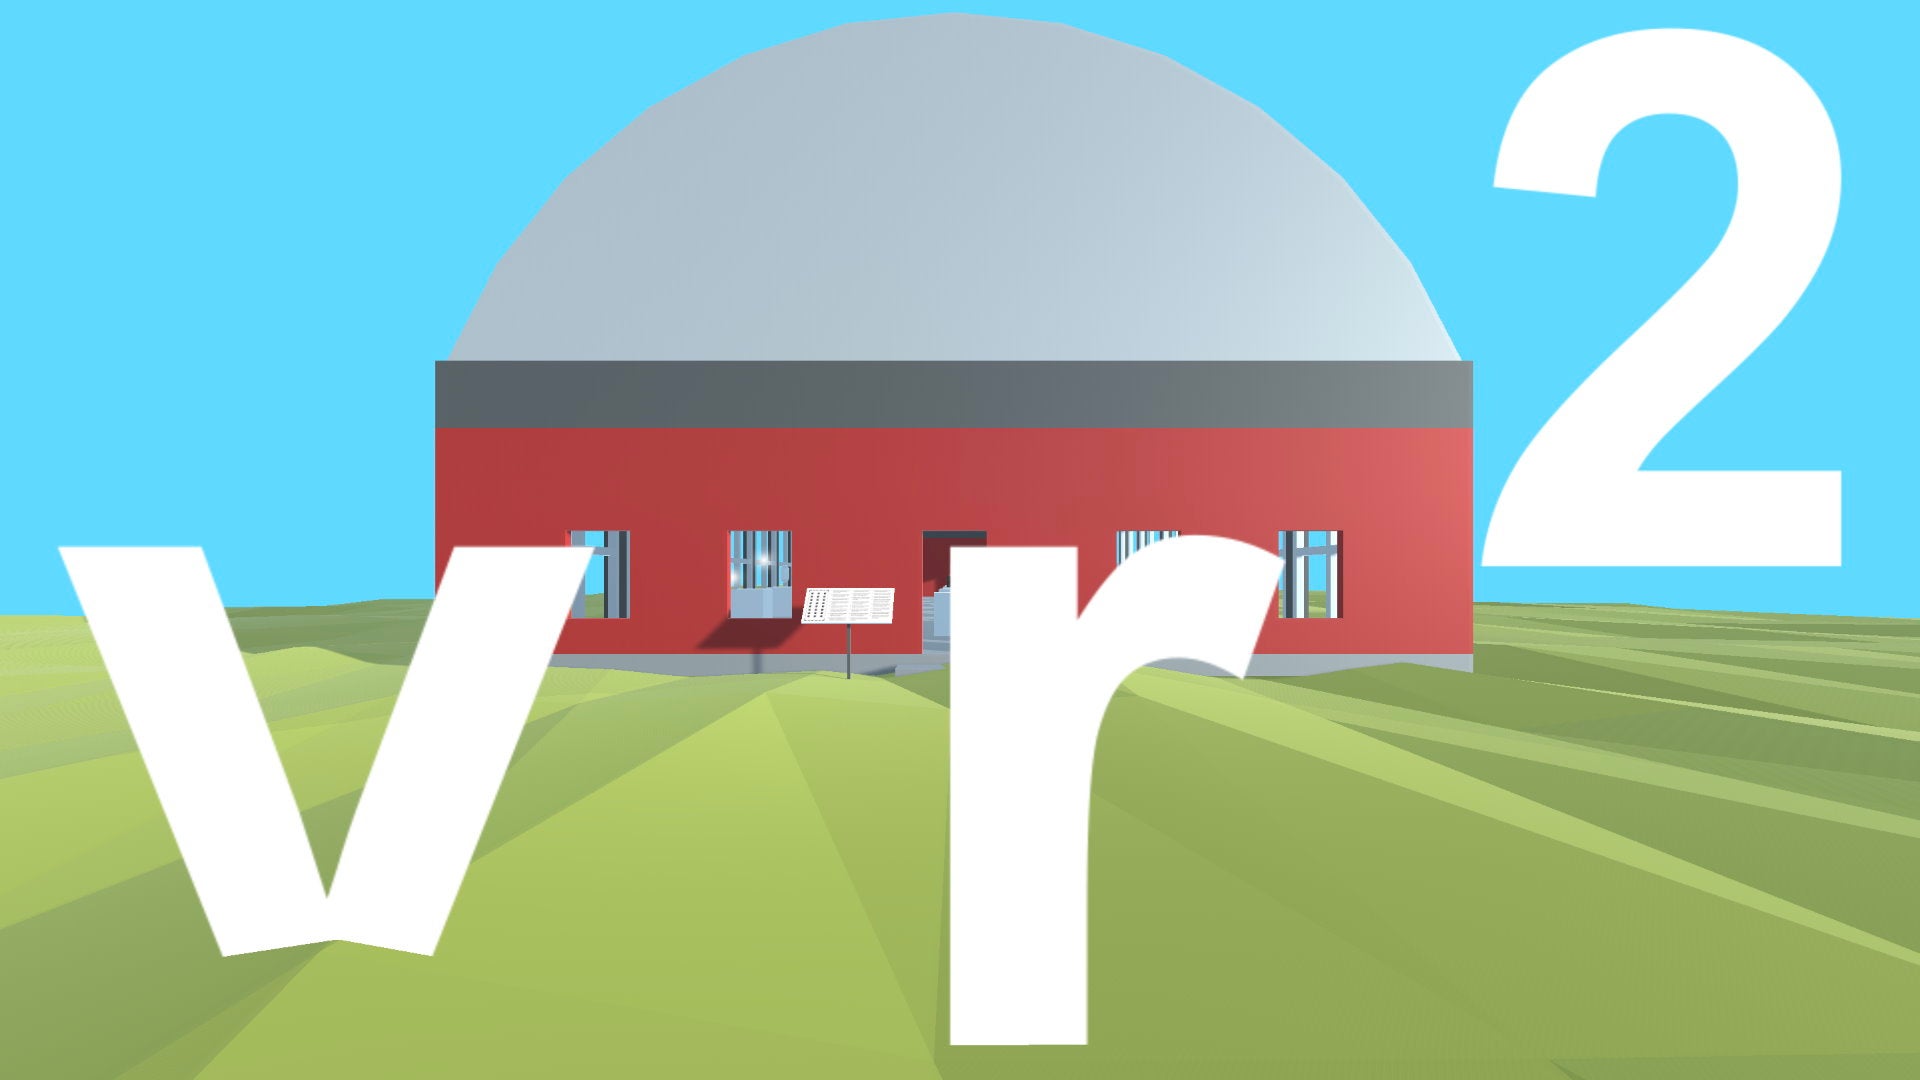 A domed red and grey exhibtion hall in a green field with the letters v r 2 in front of it.